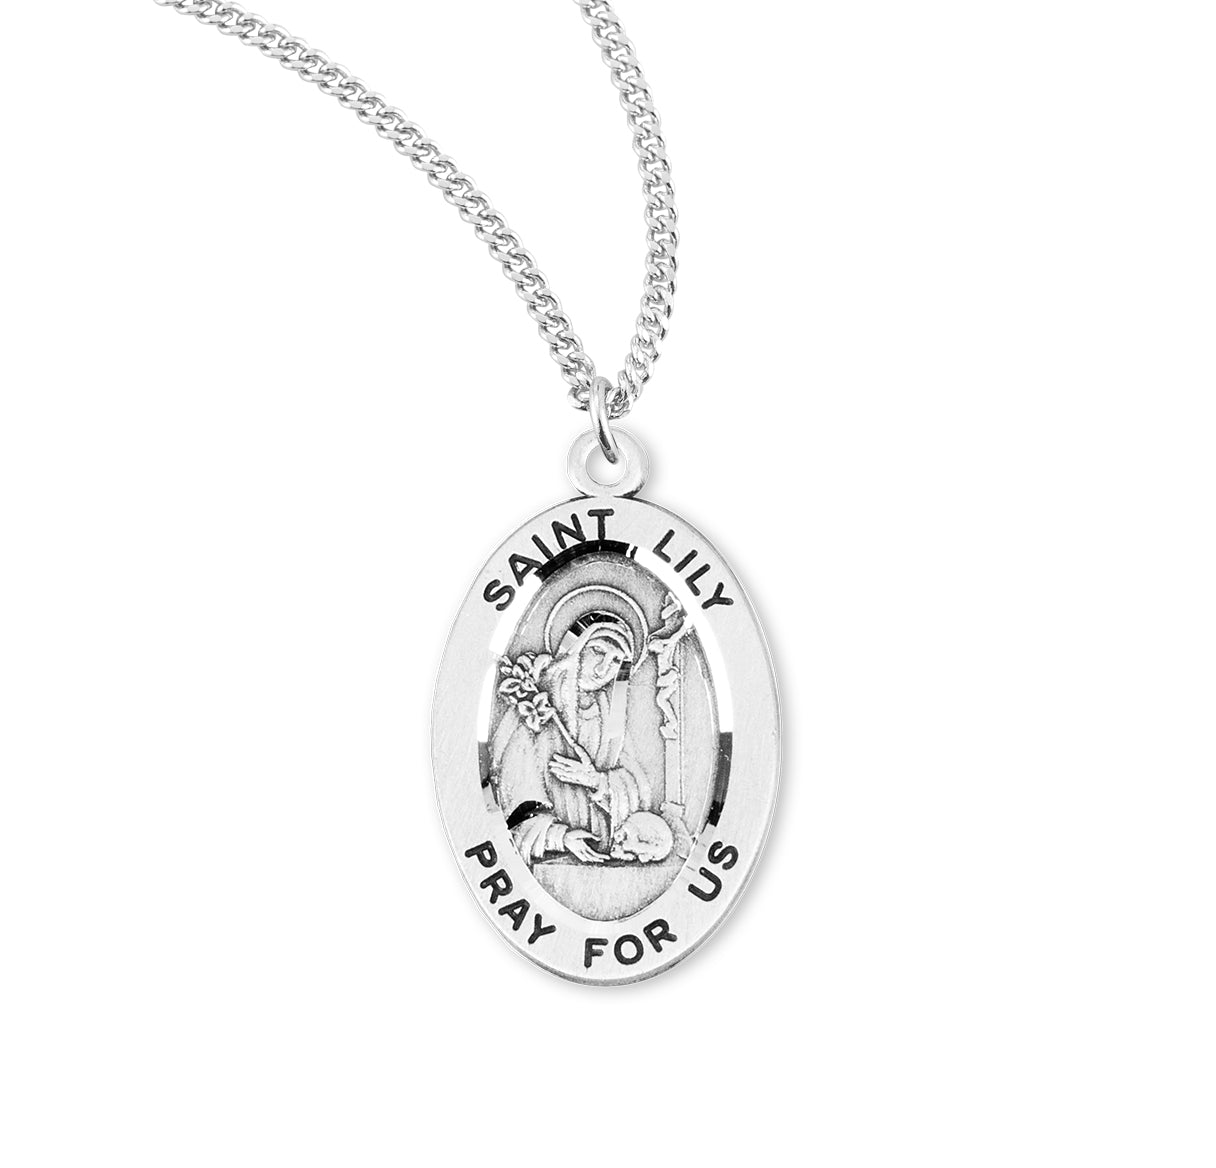 Patron Saint Lily Oval Sterling Silver Medal